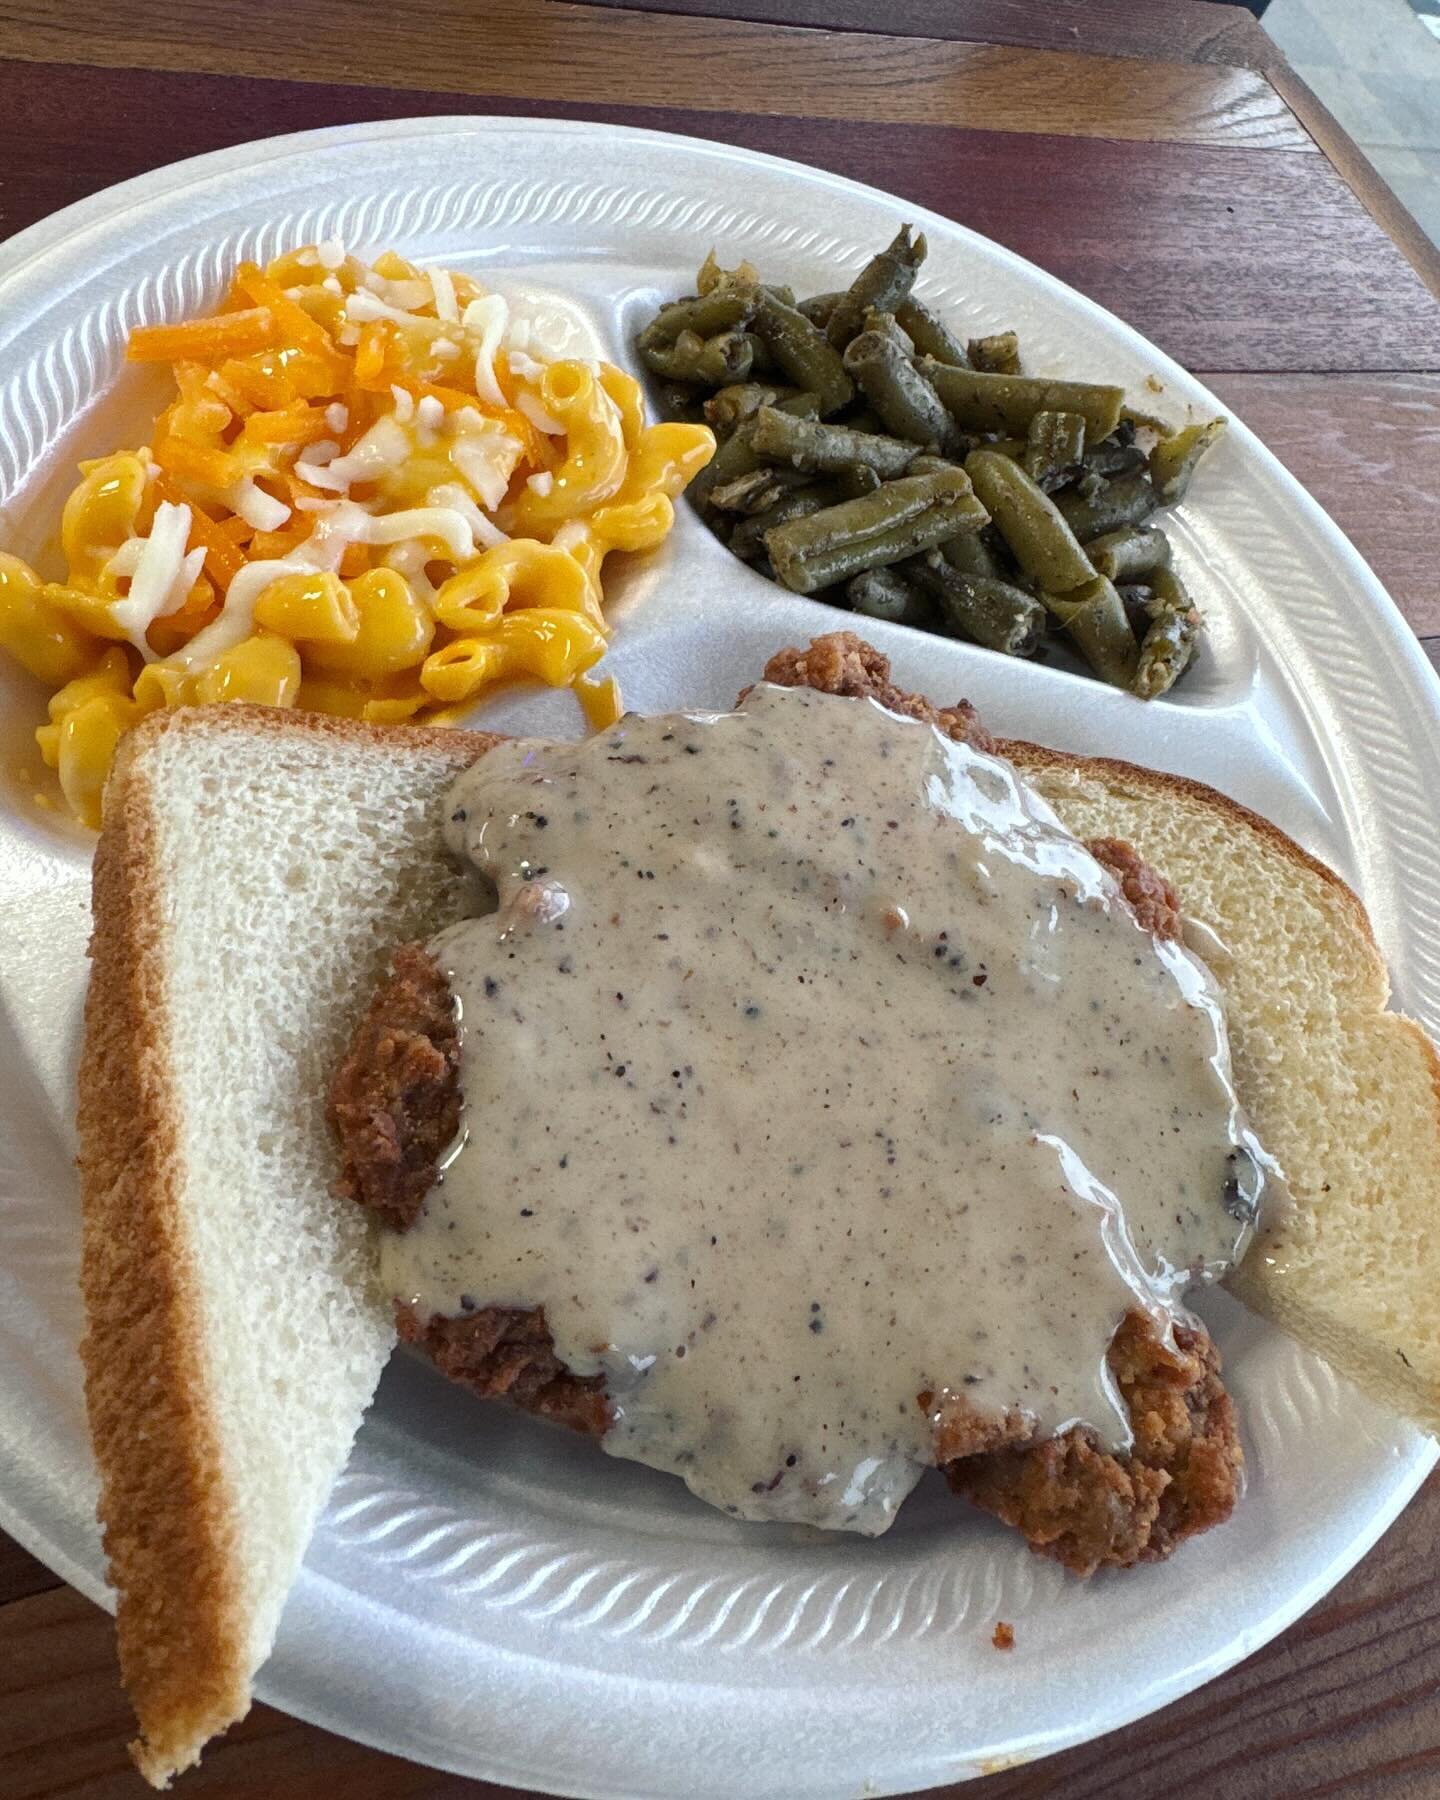 Country fried steak special today !